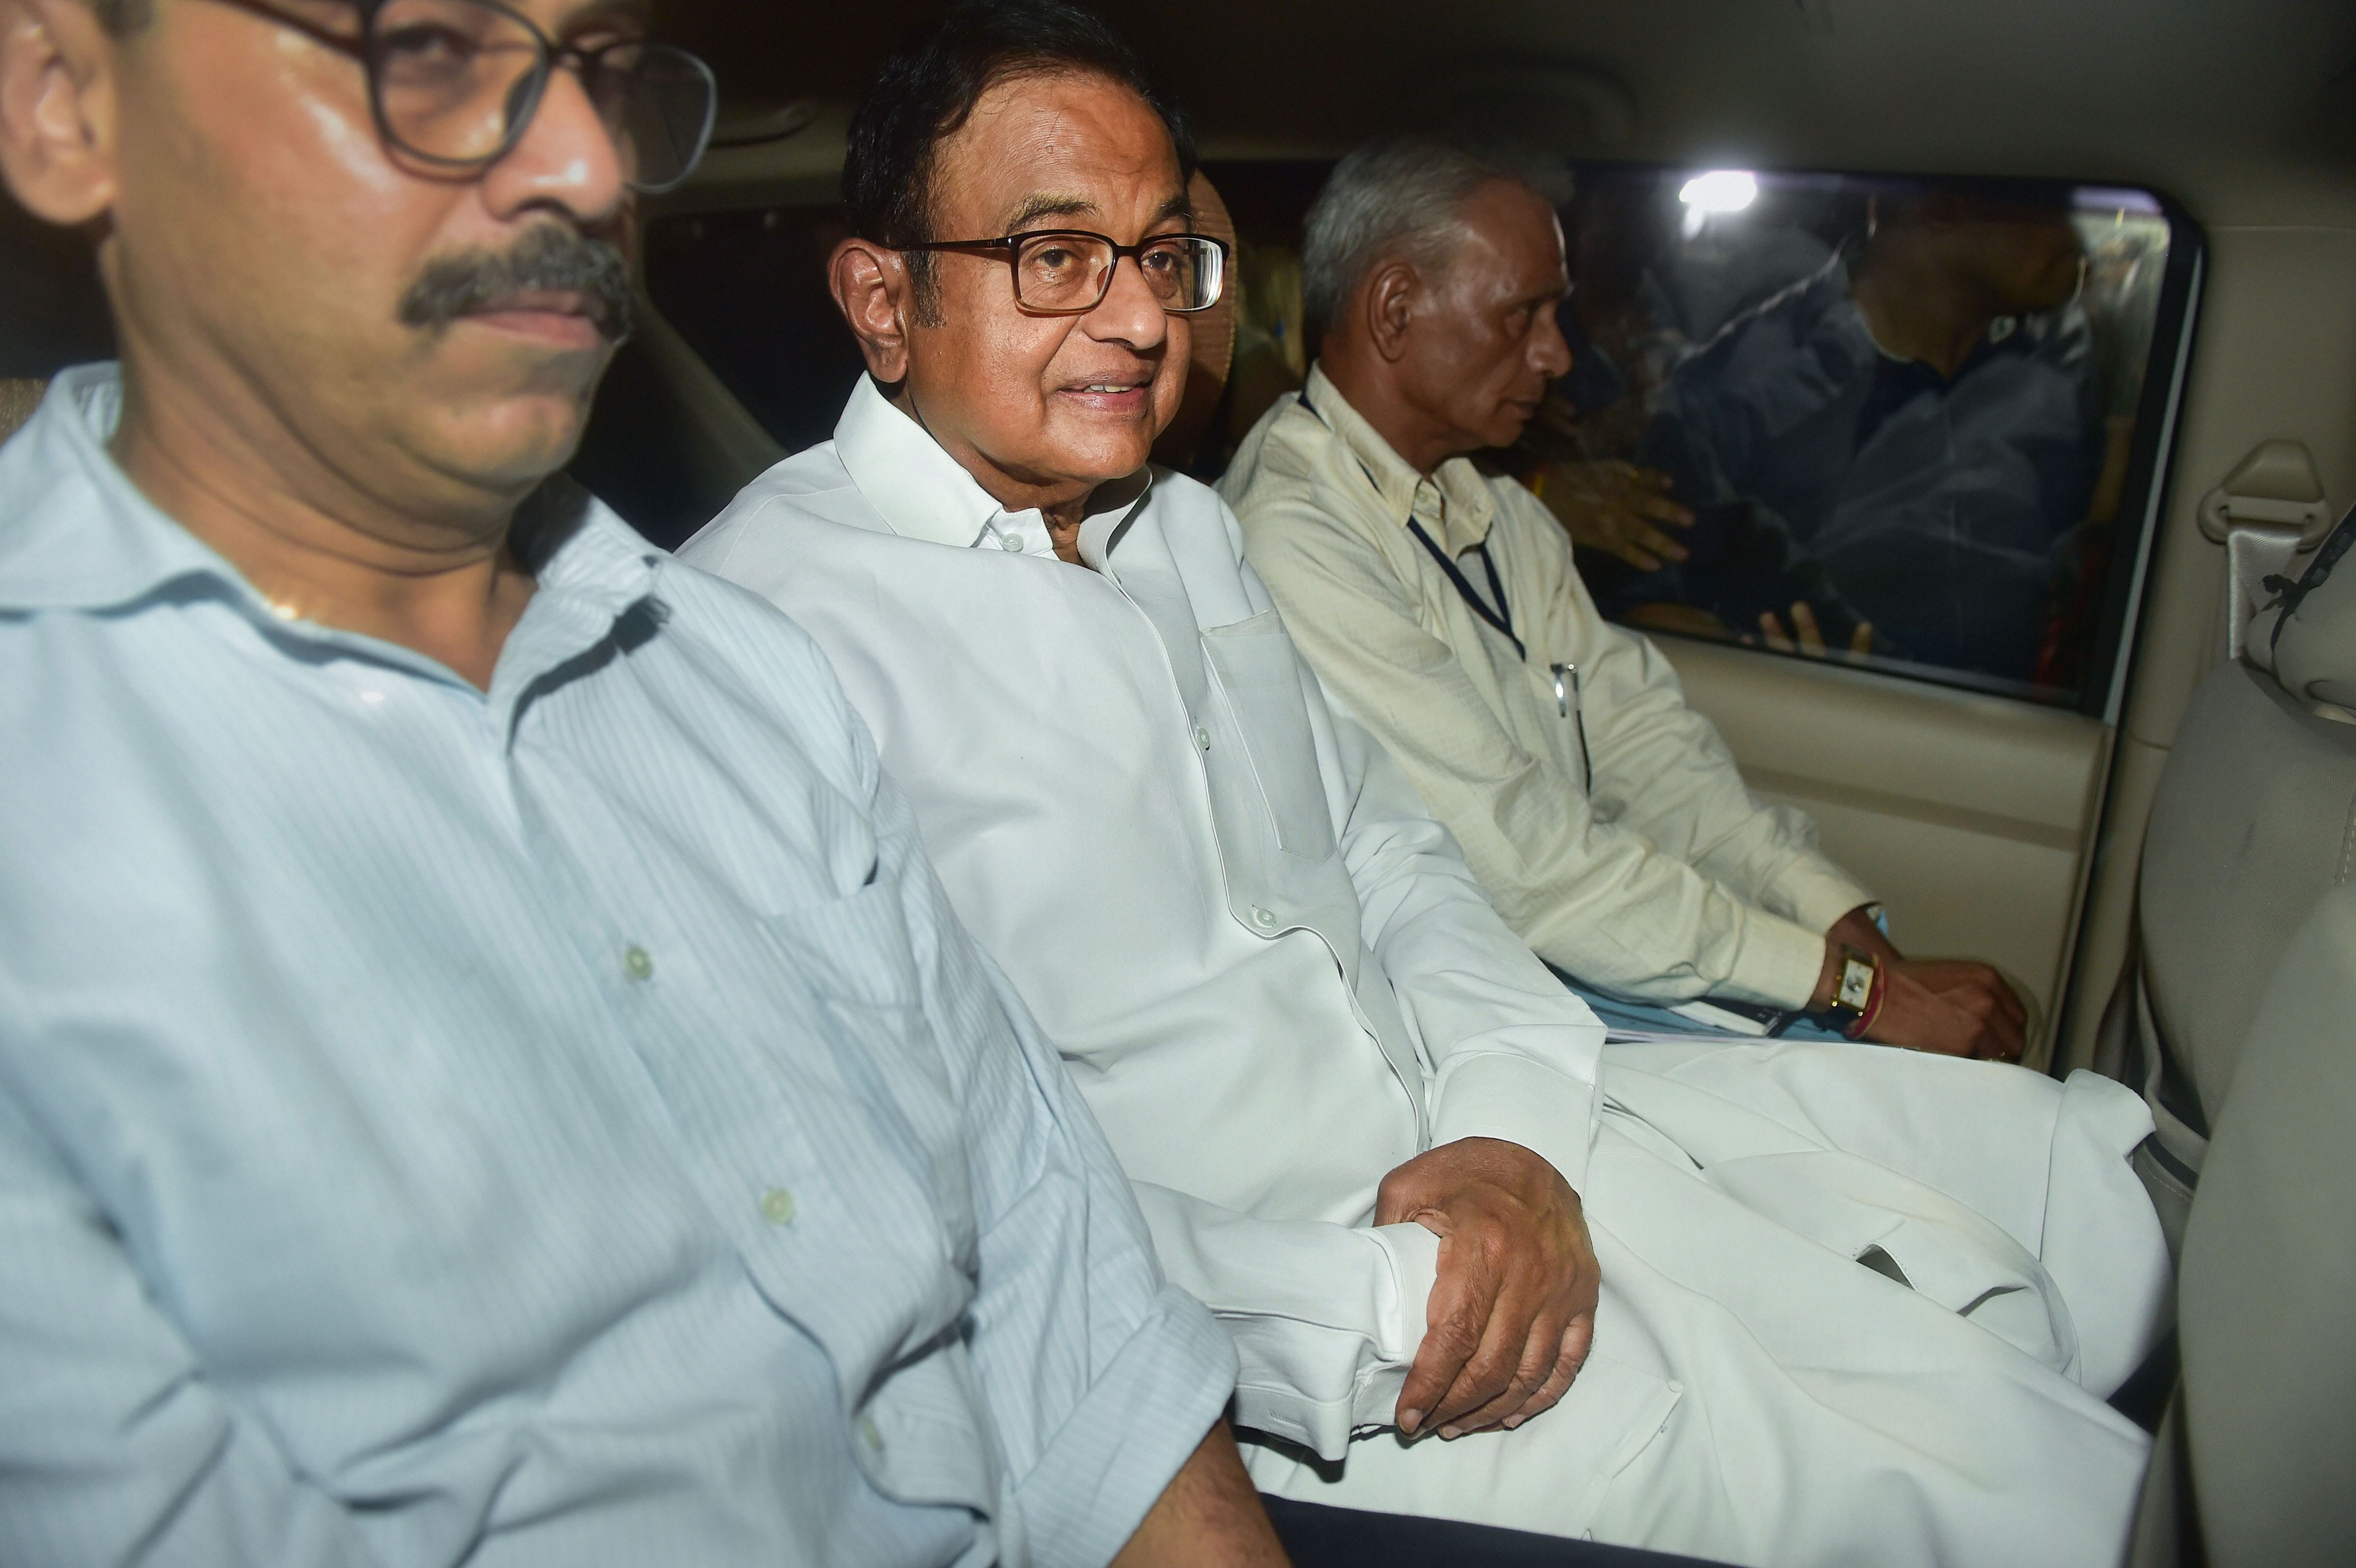 Chidambaram arrested after high drama, claims innocence in graft case